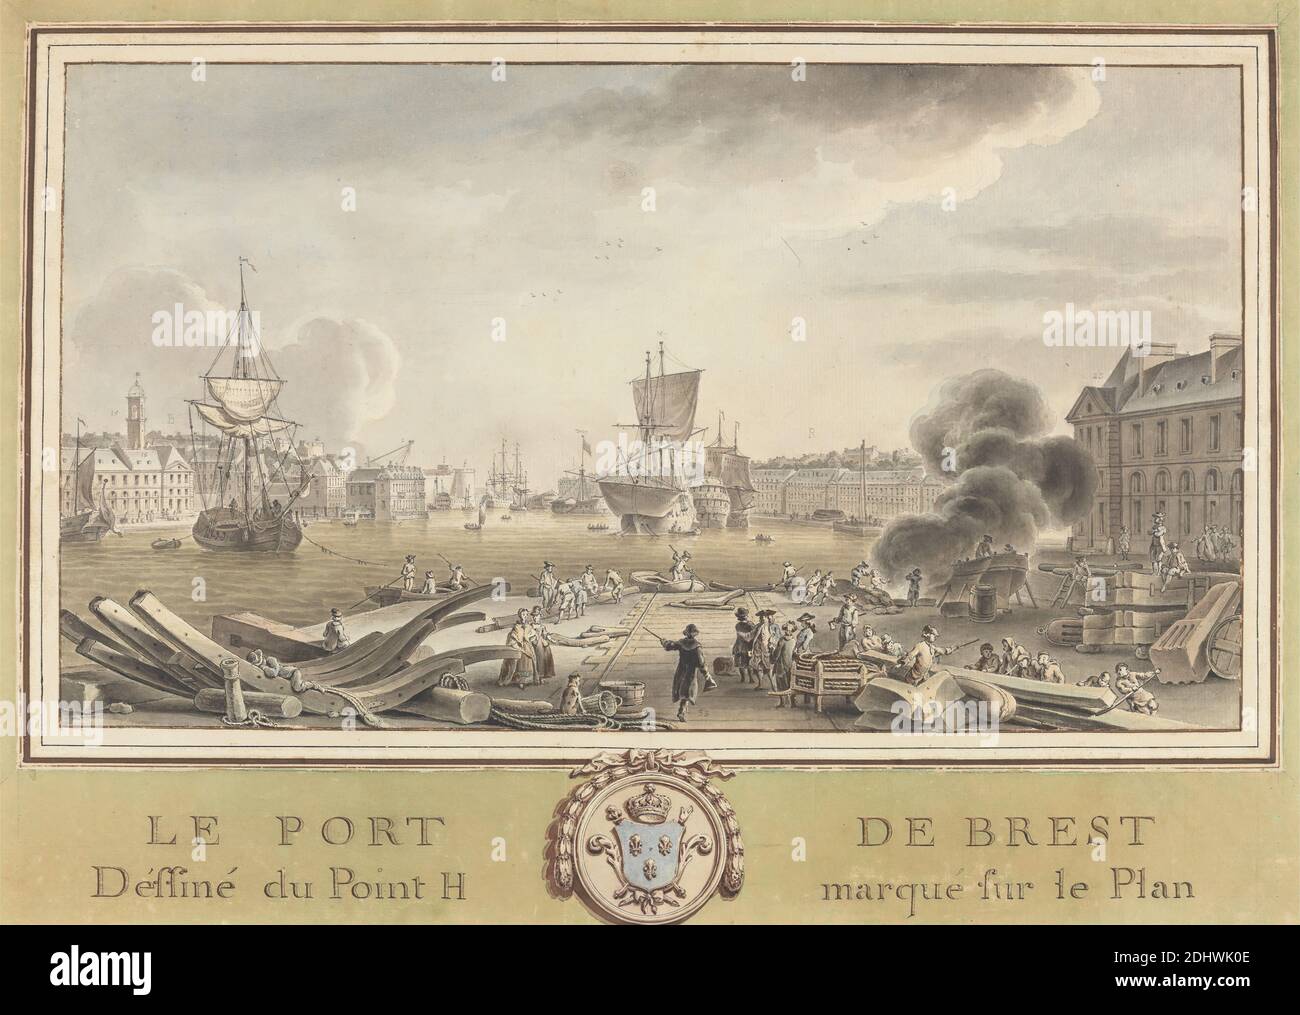 Le Pont de Brest/ Definne du Point H. Marque fur la Plan: Dock Scene with Laborers employed on Various Aspects of Ship Construction, unknown artist, undated, Watercolor, pen, and black ink on medium, slightly textured, cream laid paper, Sheet: 9 5/8 × 17 inches (24.4 × 43.2 cm) and Mount: 13 5/8 × 19 1/4 inches (34.6 × 48.9 cm Stock Photo